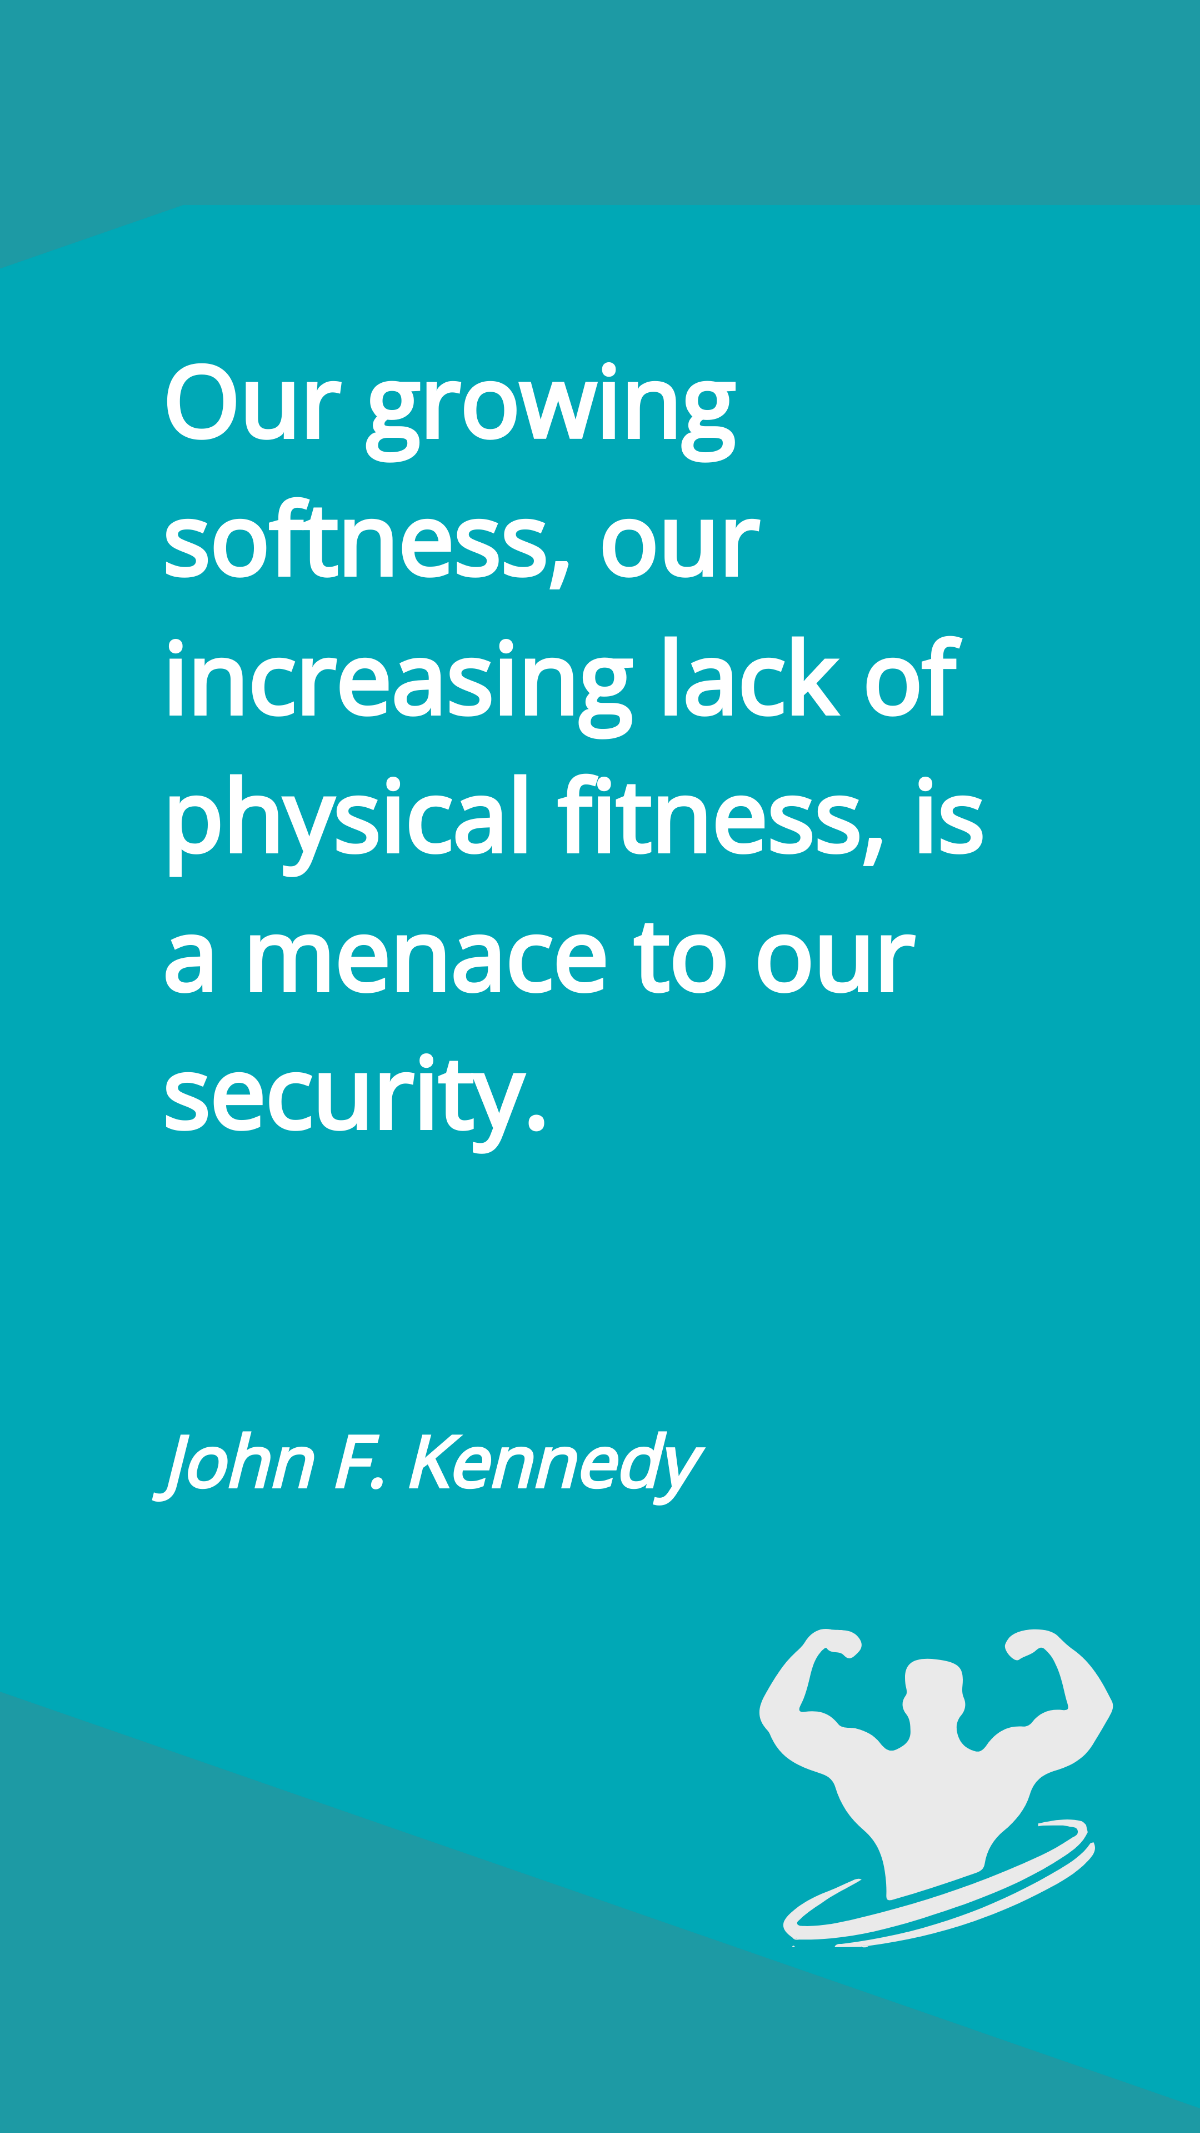 John F. Kennedy - Our growing softness, our increasing lack of physical fitness, is a menace to our security.